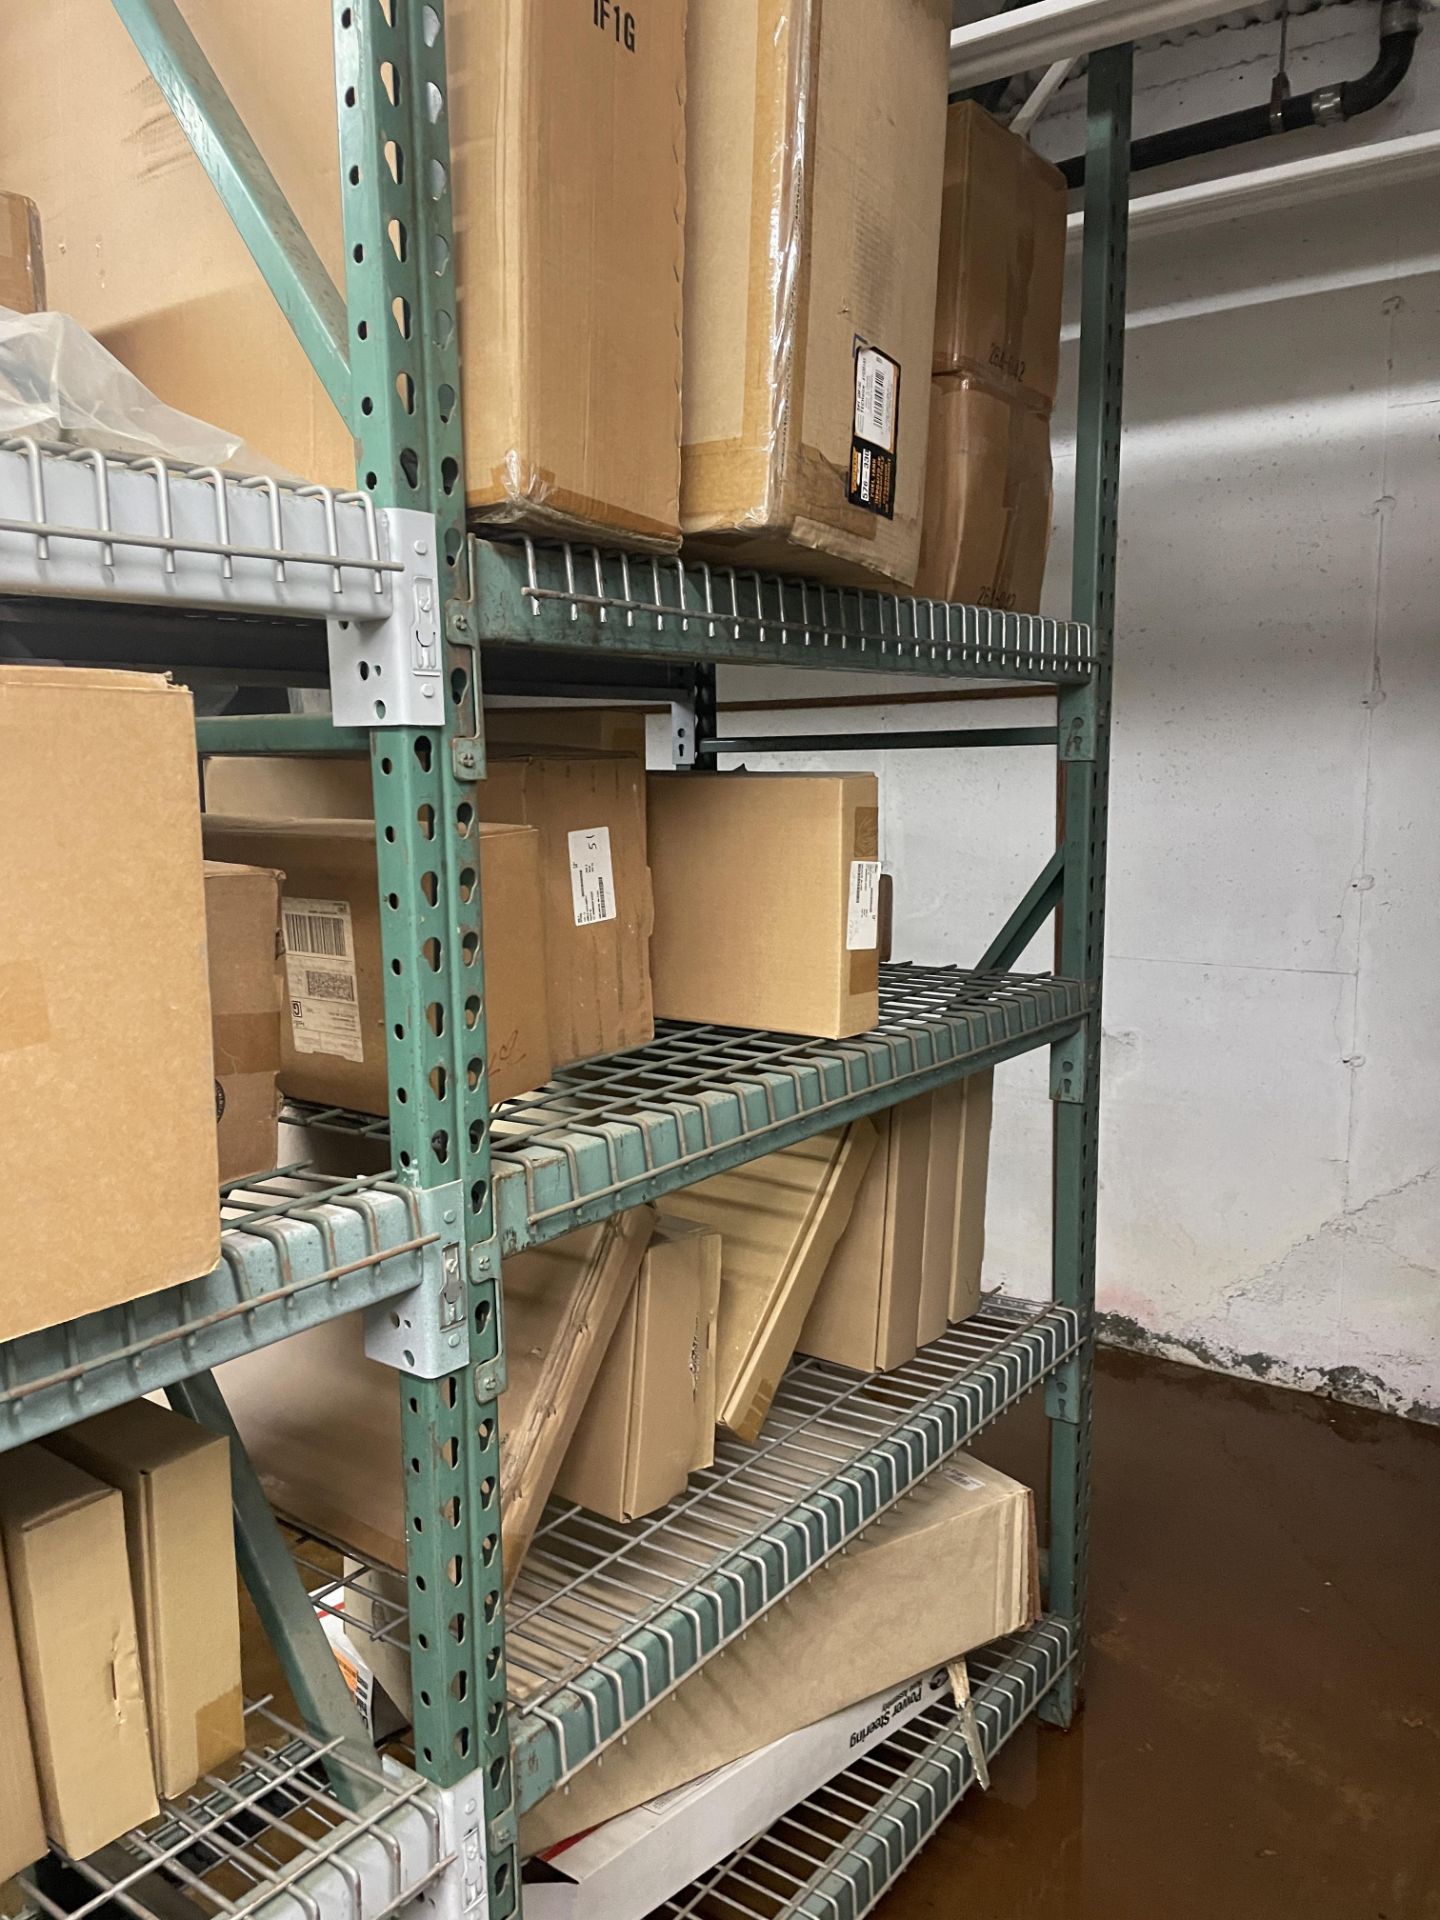 {LOT} 2 Sided Section OF Racking W/ NIB Doorman, Oil Pans, Gas Tanks, Oil Cooler Lines, Window - Image 9 of 13